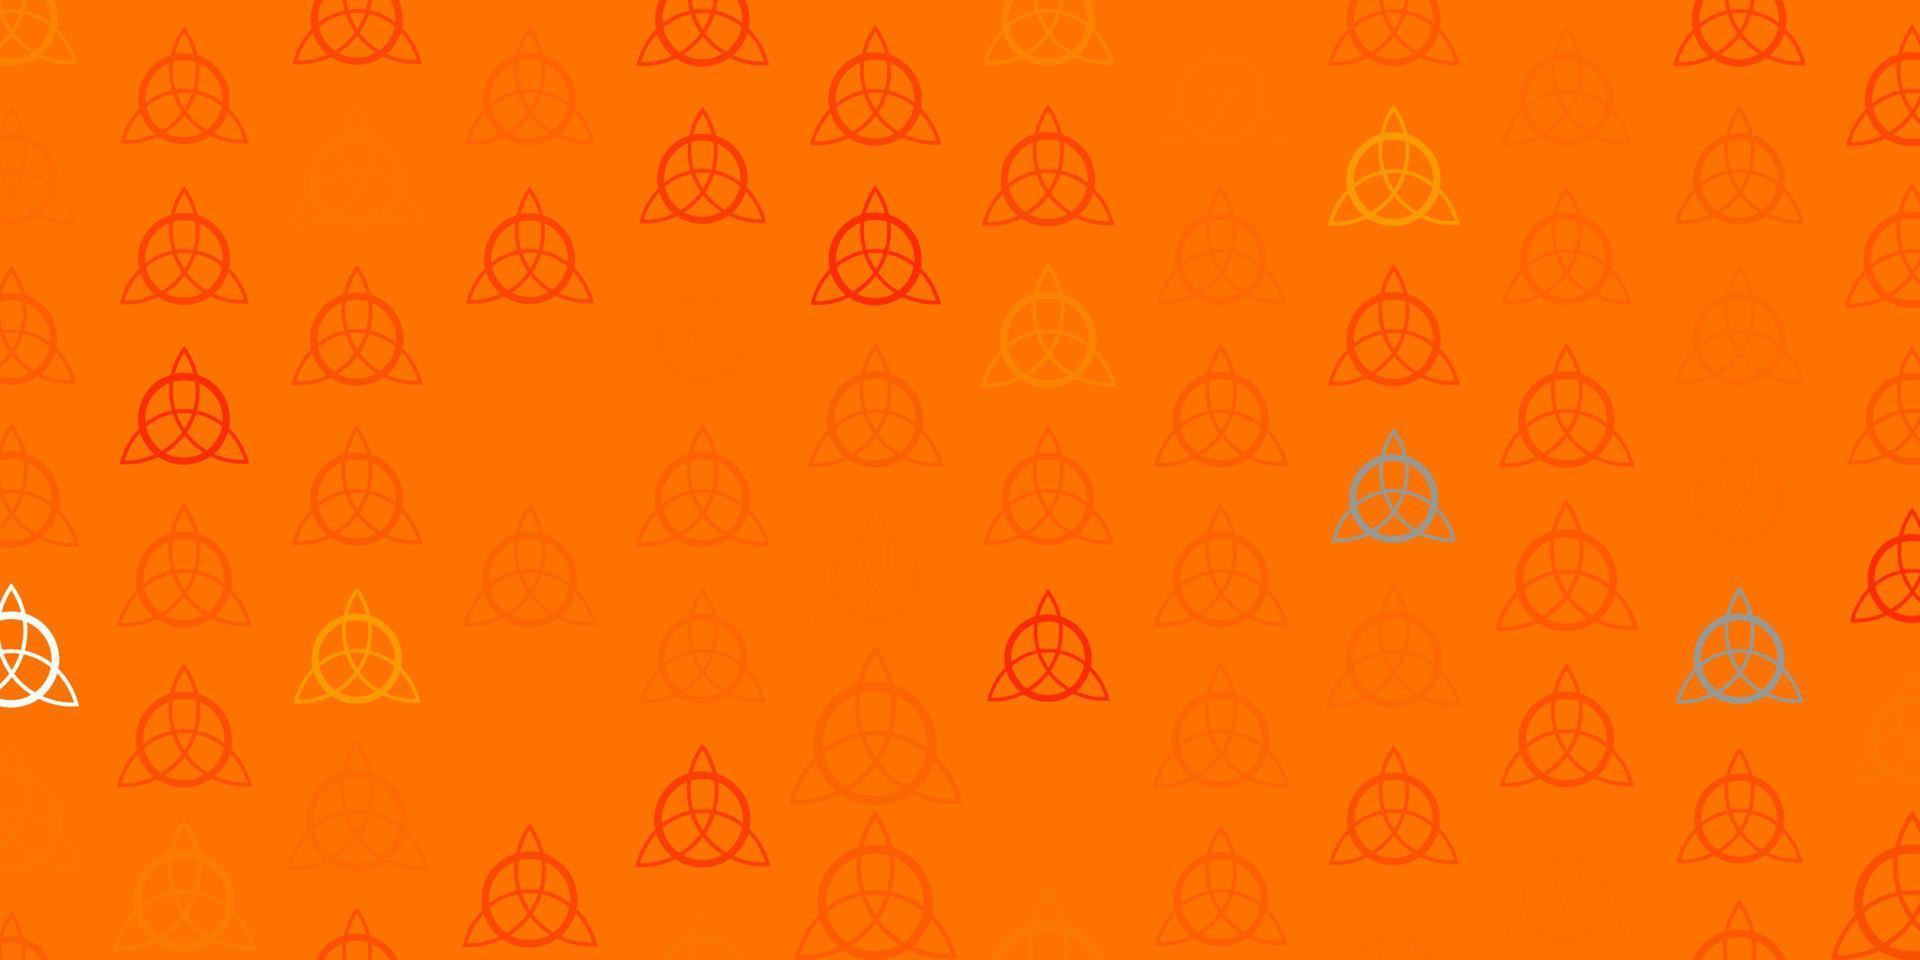 Light Yellow vector background with occult symbols.